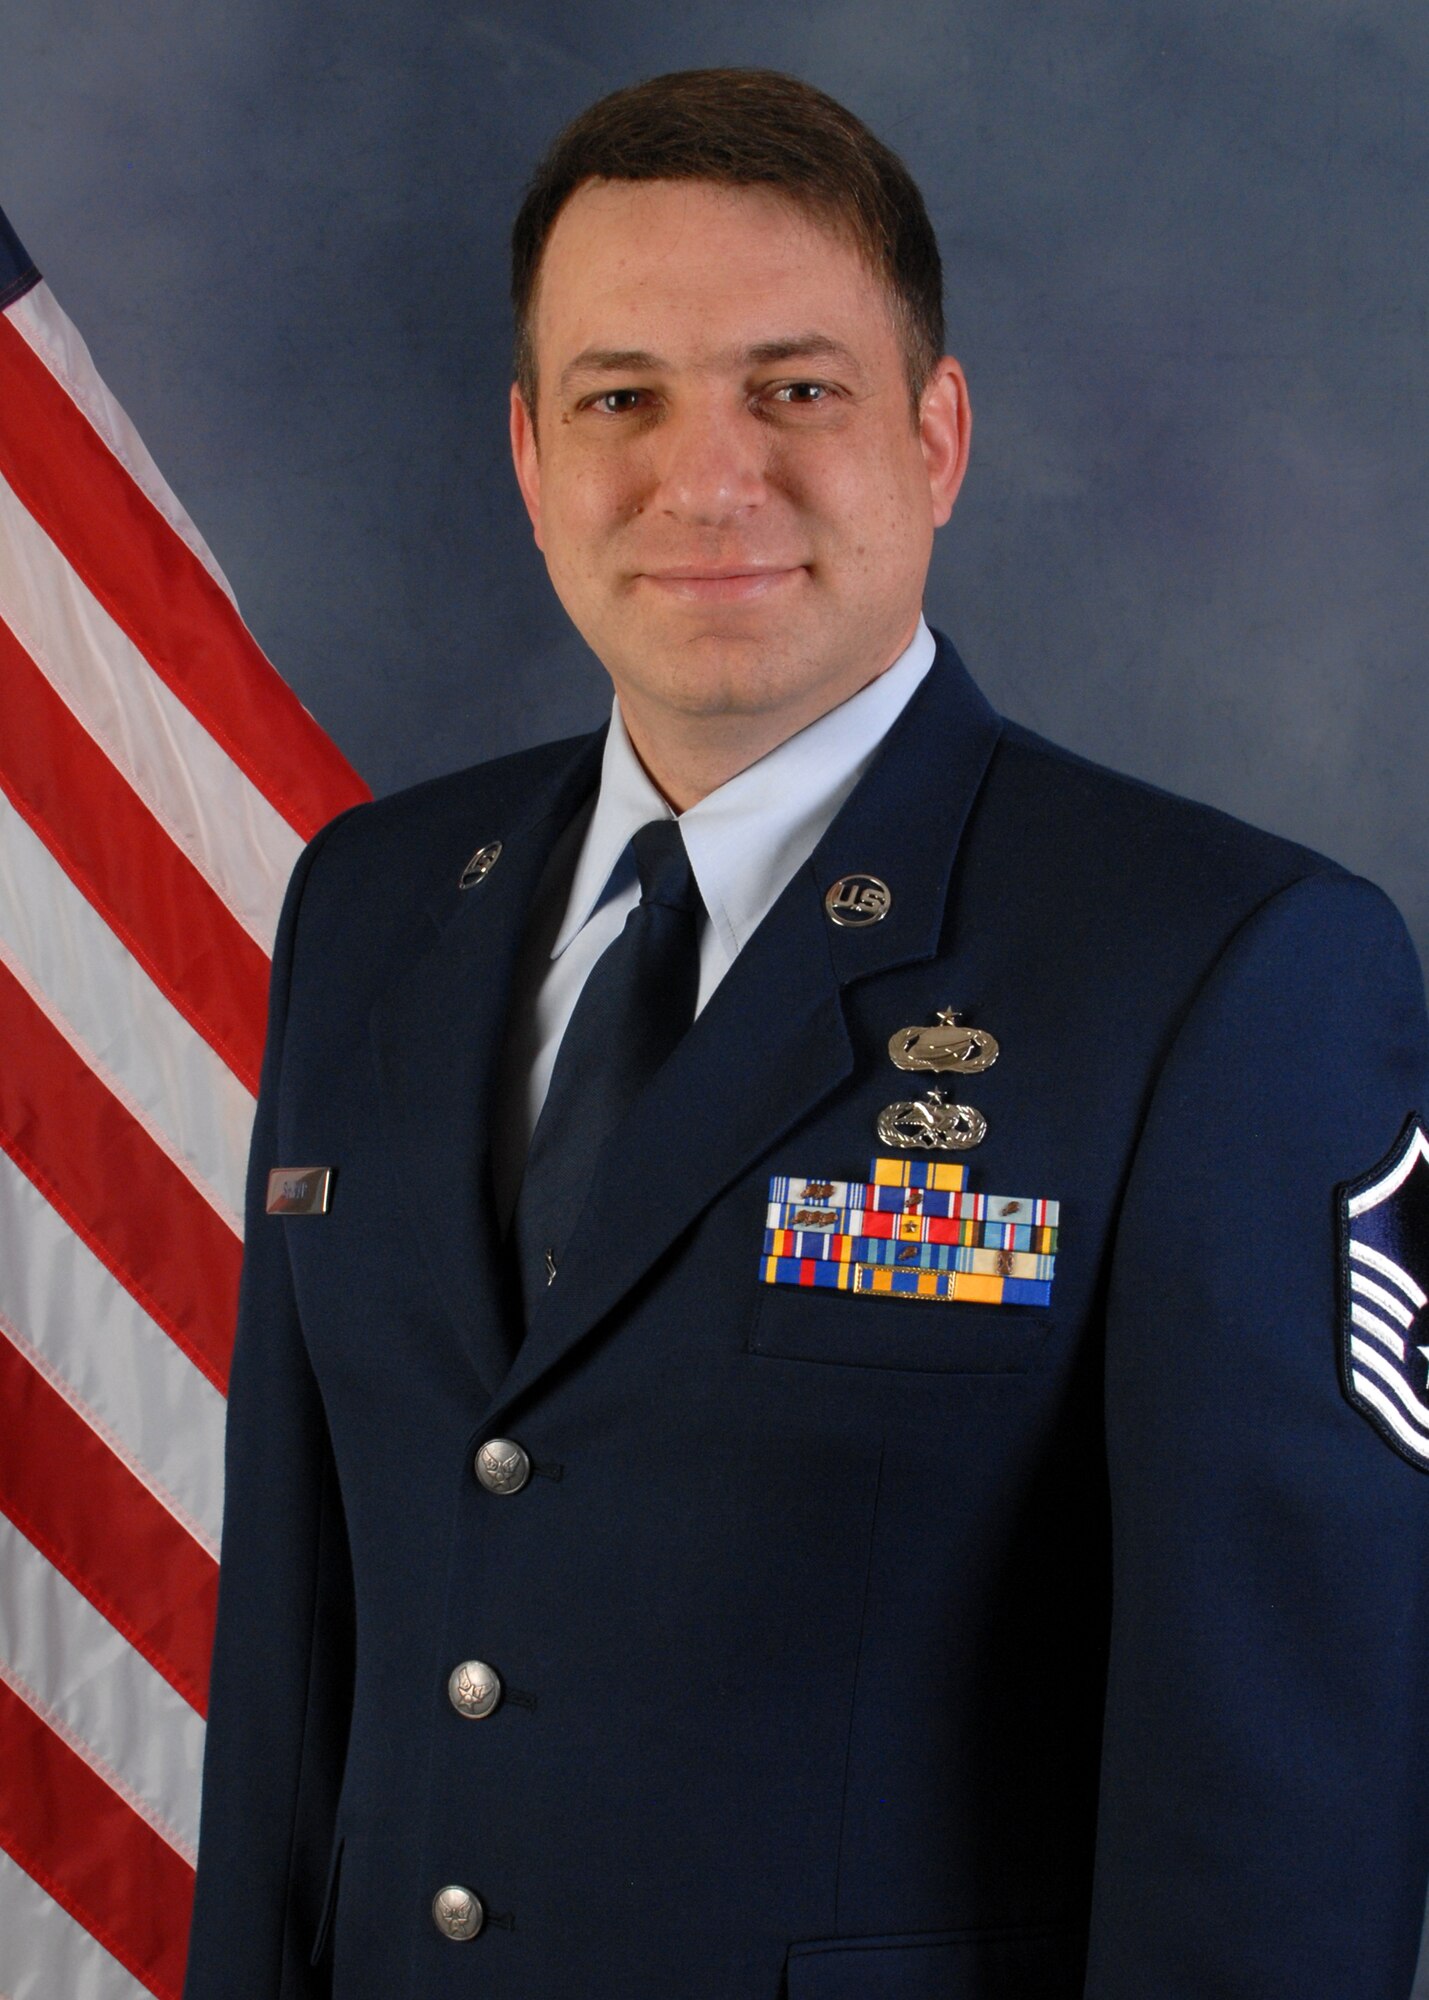 Master. Sgt. Michael Shirar, 173rd Maintenance Training Manager, was selected as the 2013 Airman of the Year Category III for the 173rd Fighter Wing.  (U.S. Air National Guard photo by Master Sgt. Jennifer Shirar, released)